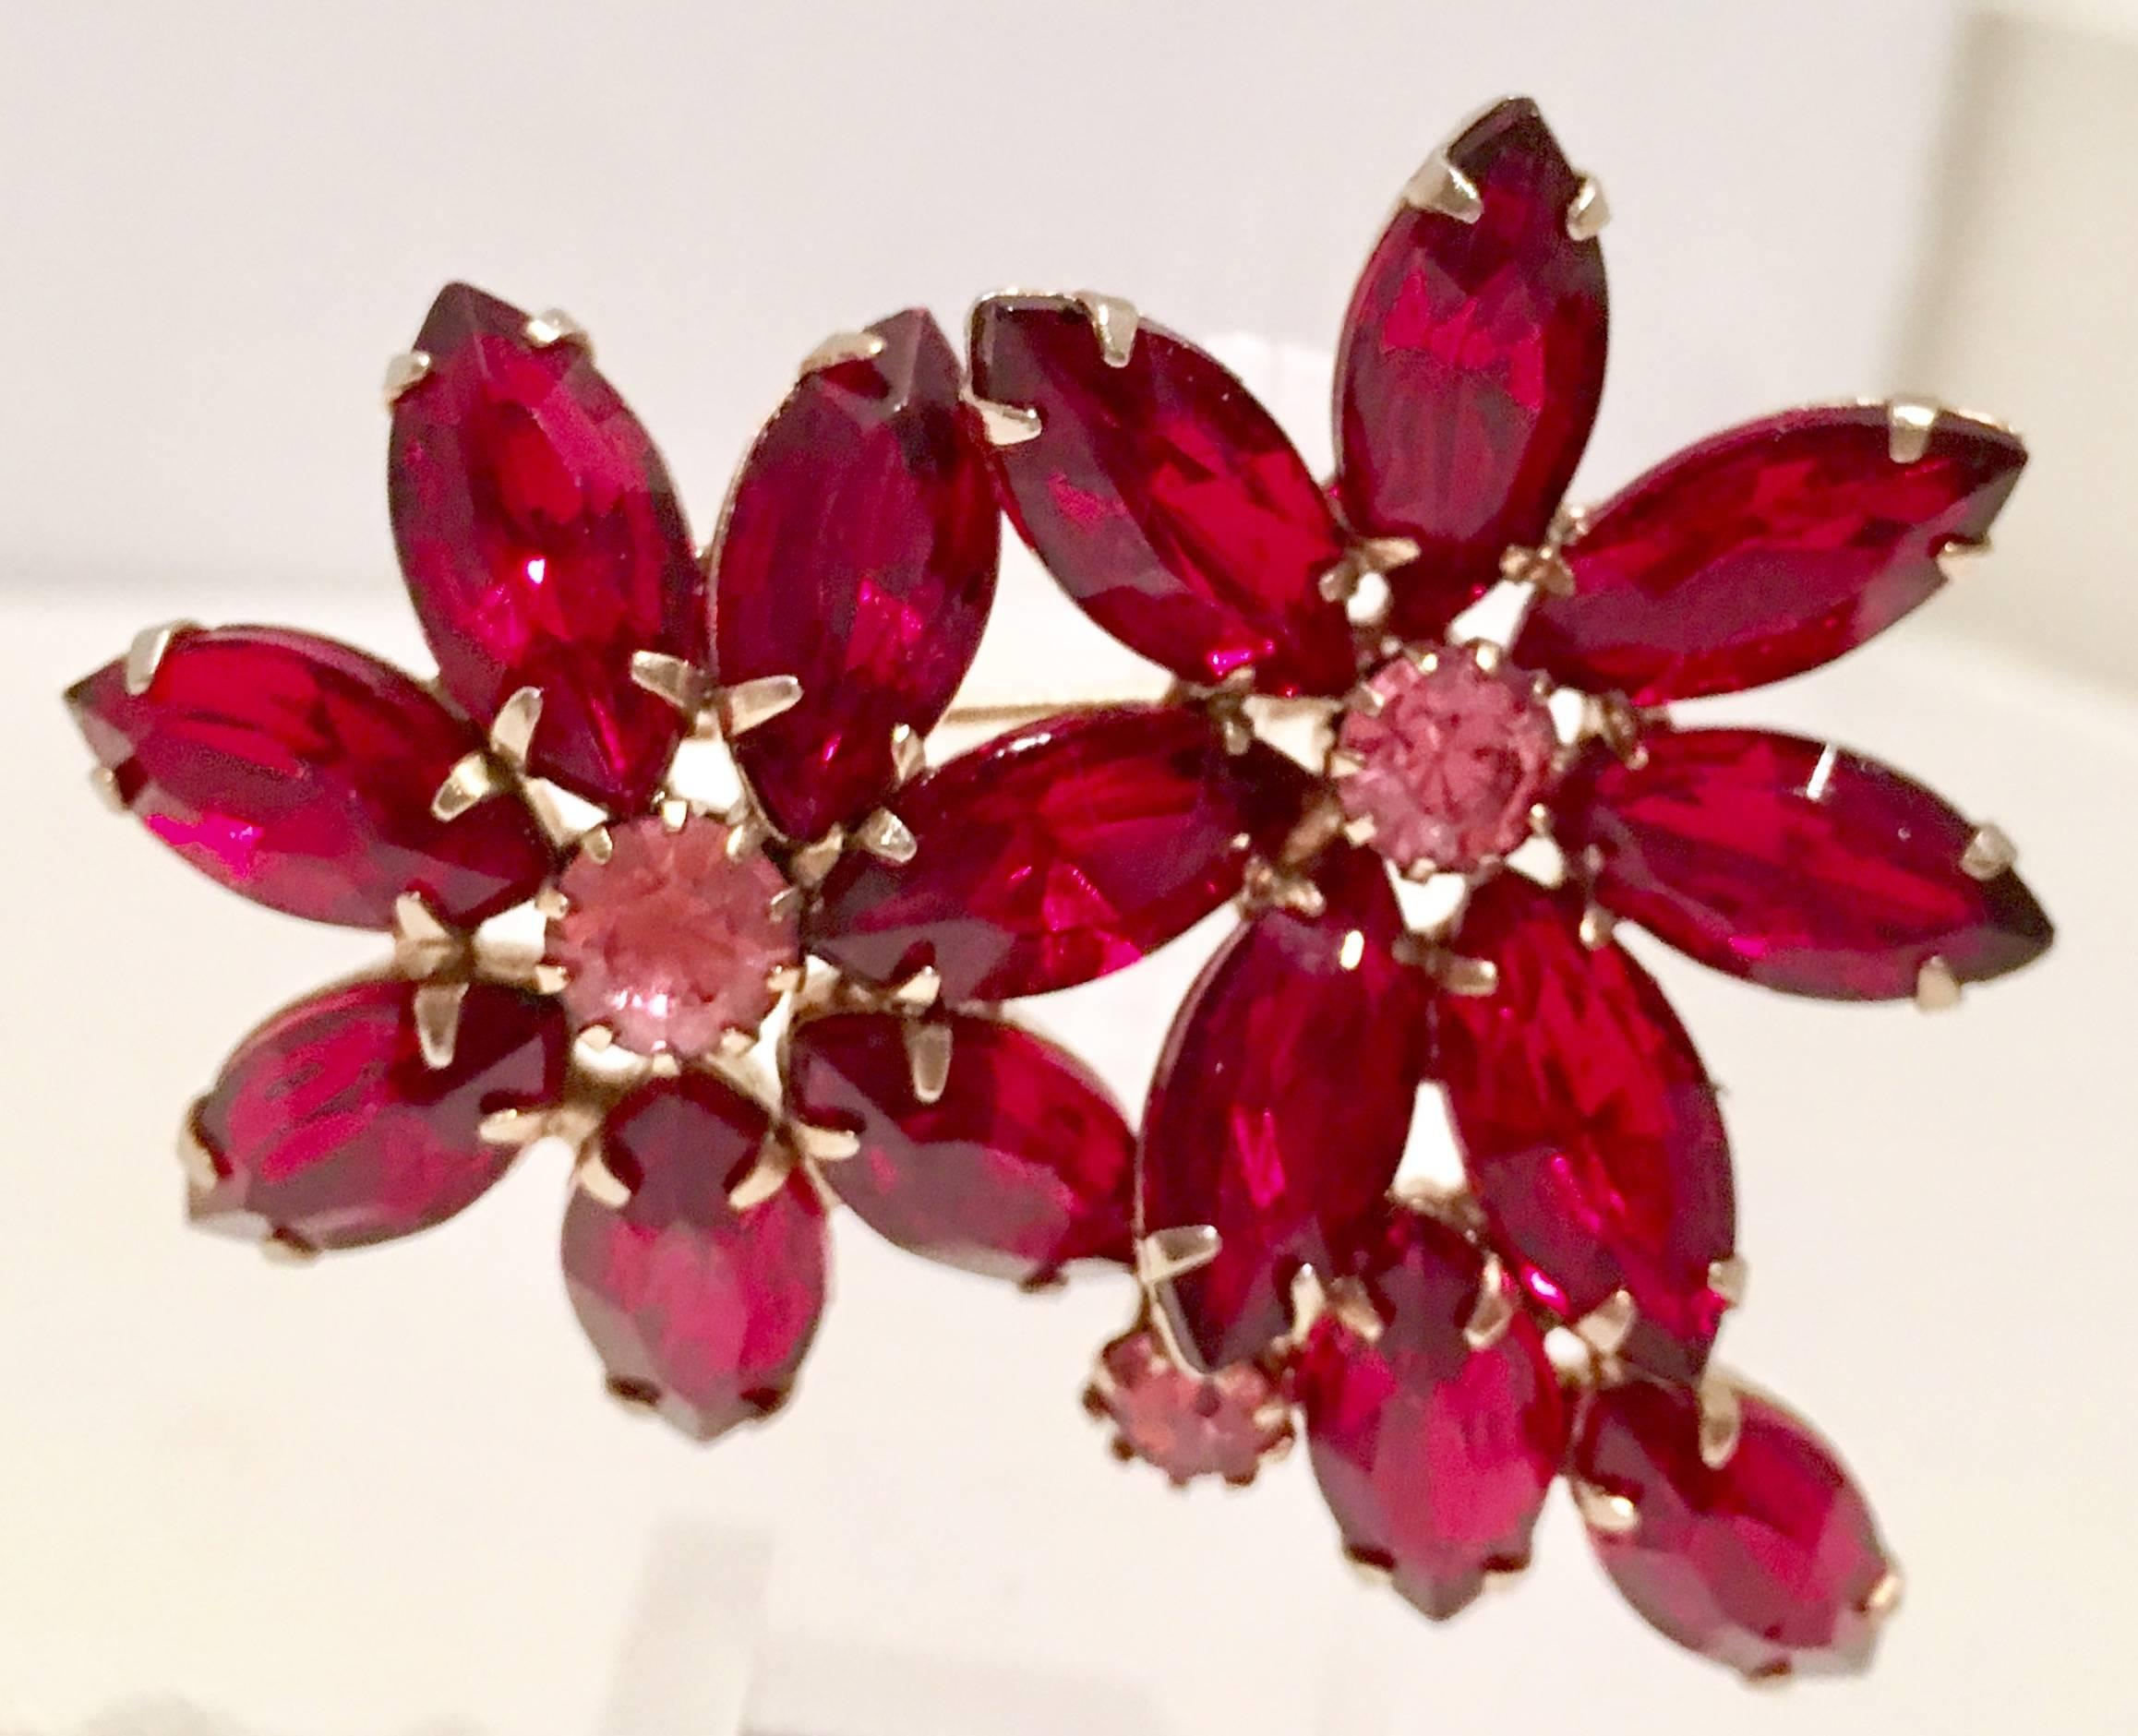 Brilliant prong set ruby and pink sapphire Austrian Crystal three dimensional double flower brooch, set in gold tone metal.